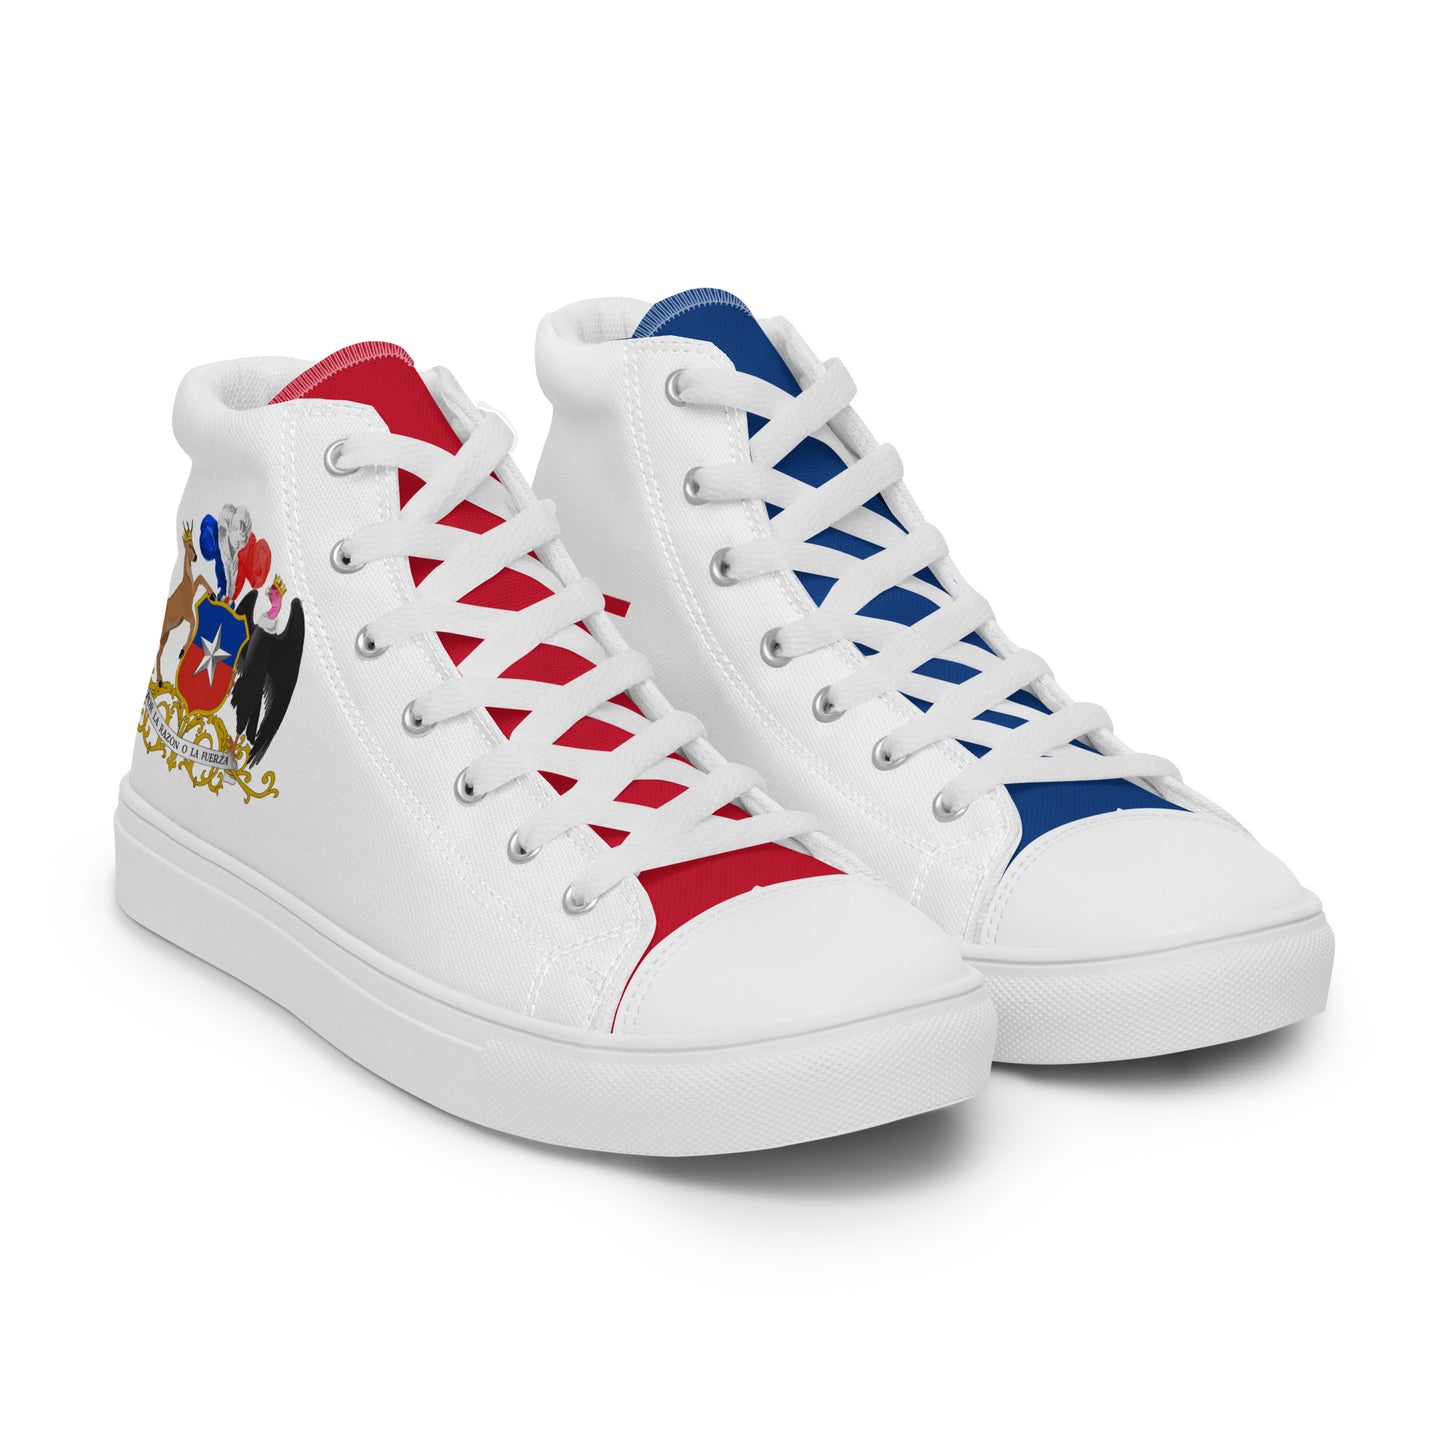 Chile - Men - White - High top shoes